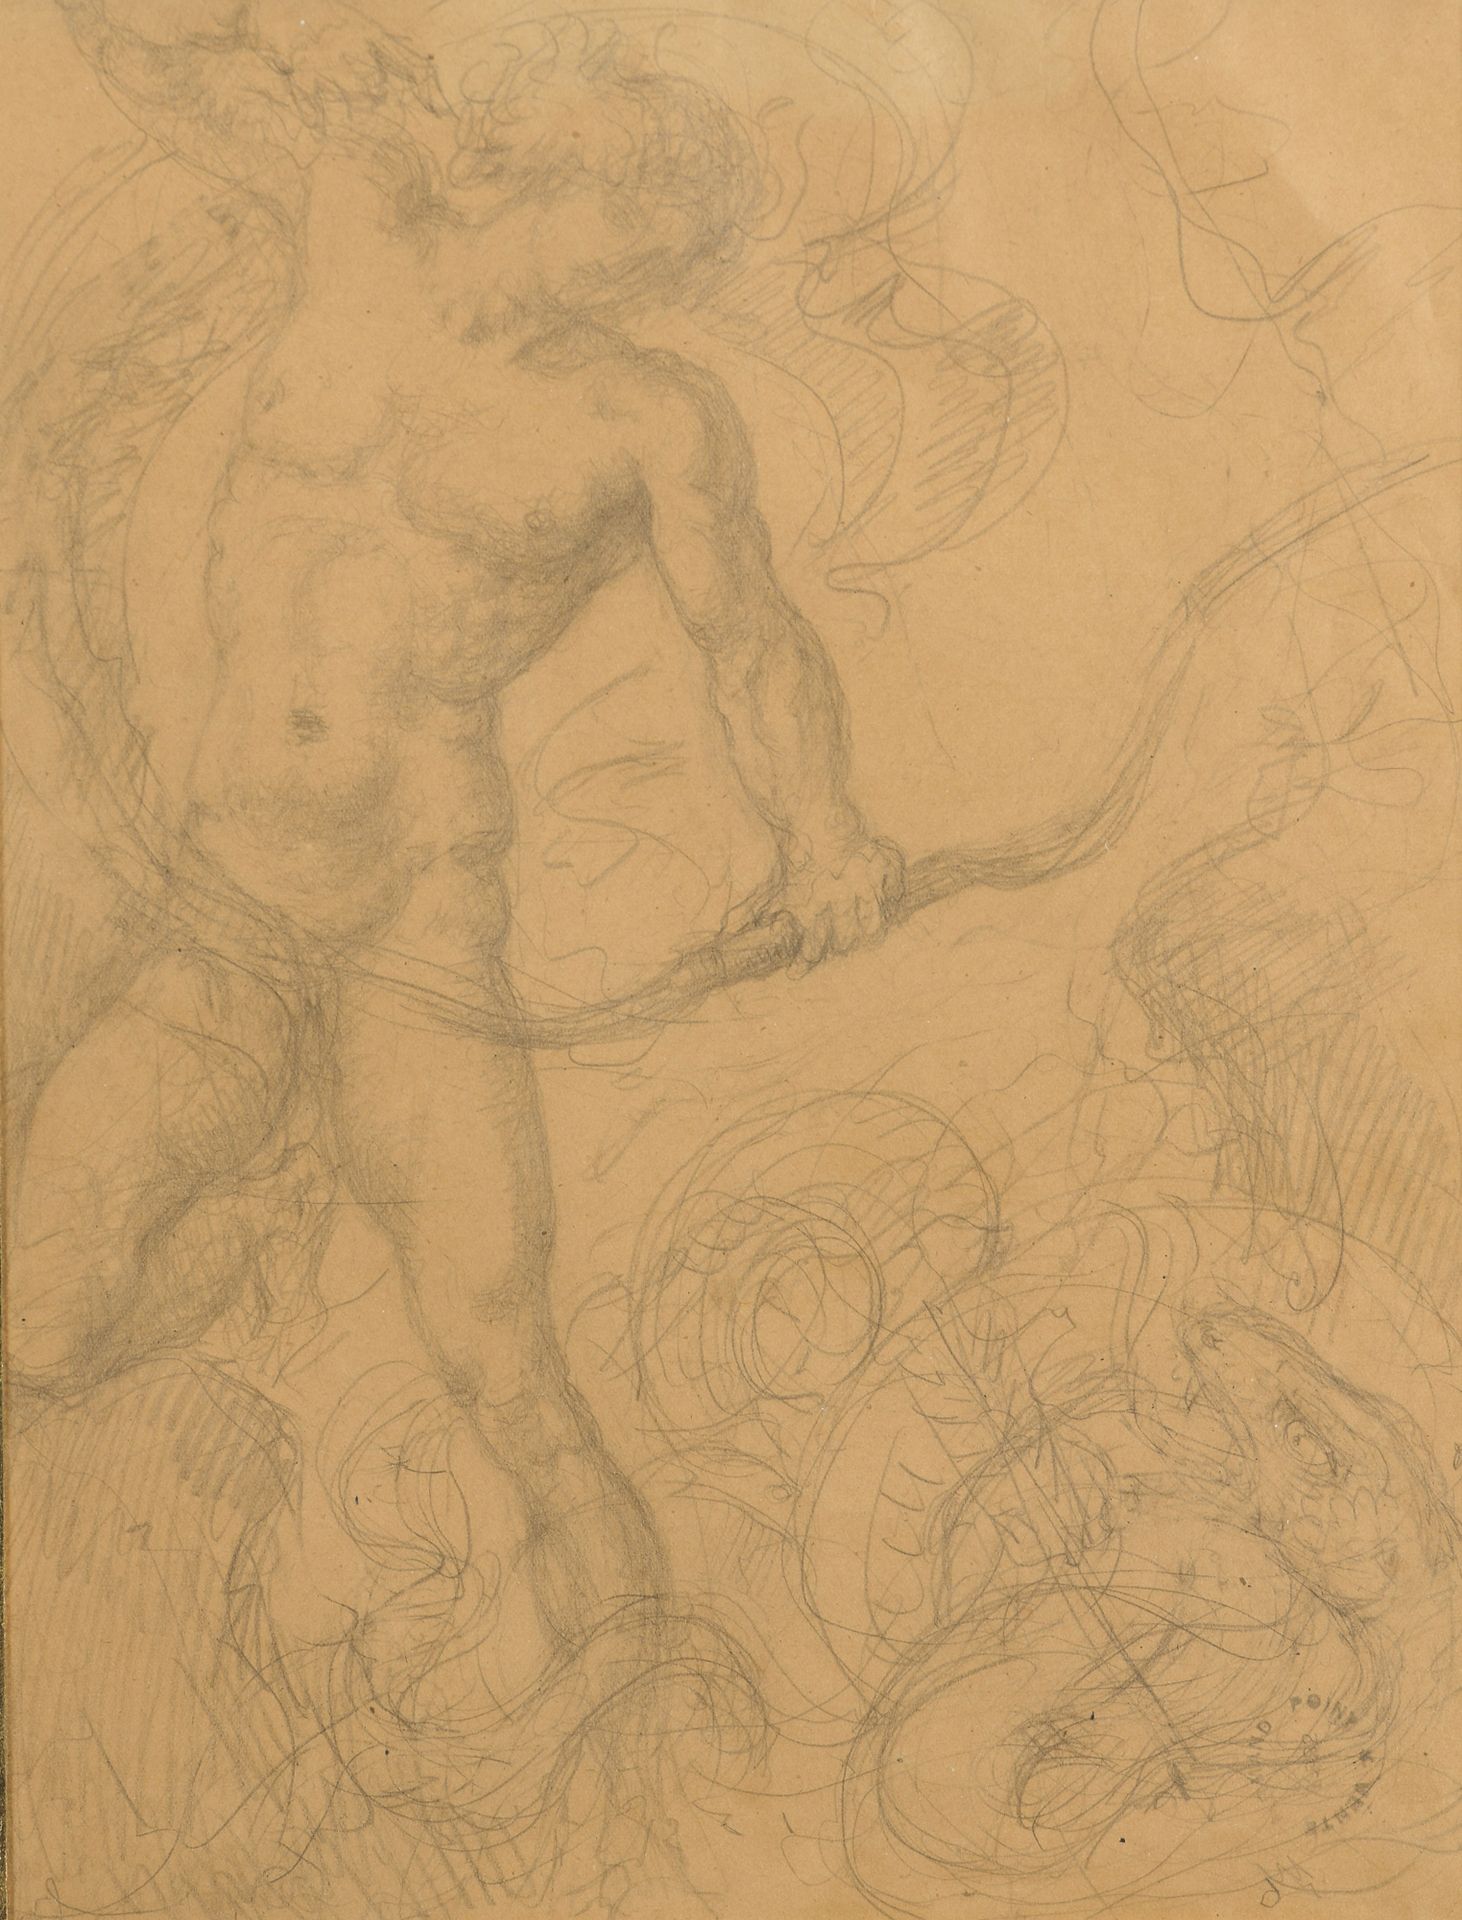 Null Armand POINT (1860-1932)

Hercules and the Lacedon Serpent

Pencil.

Bears &hellip;